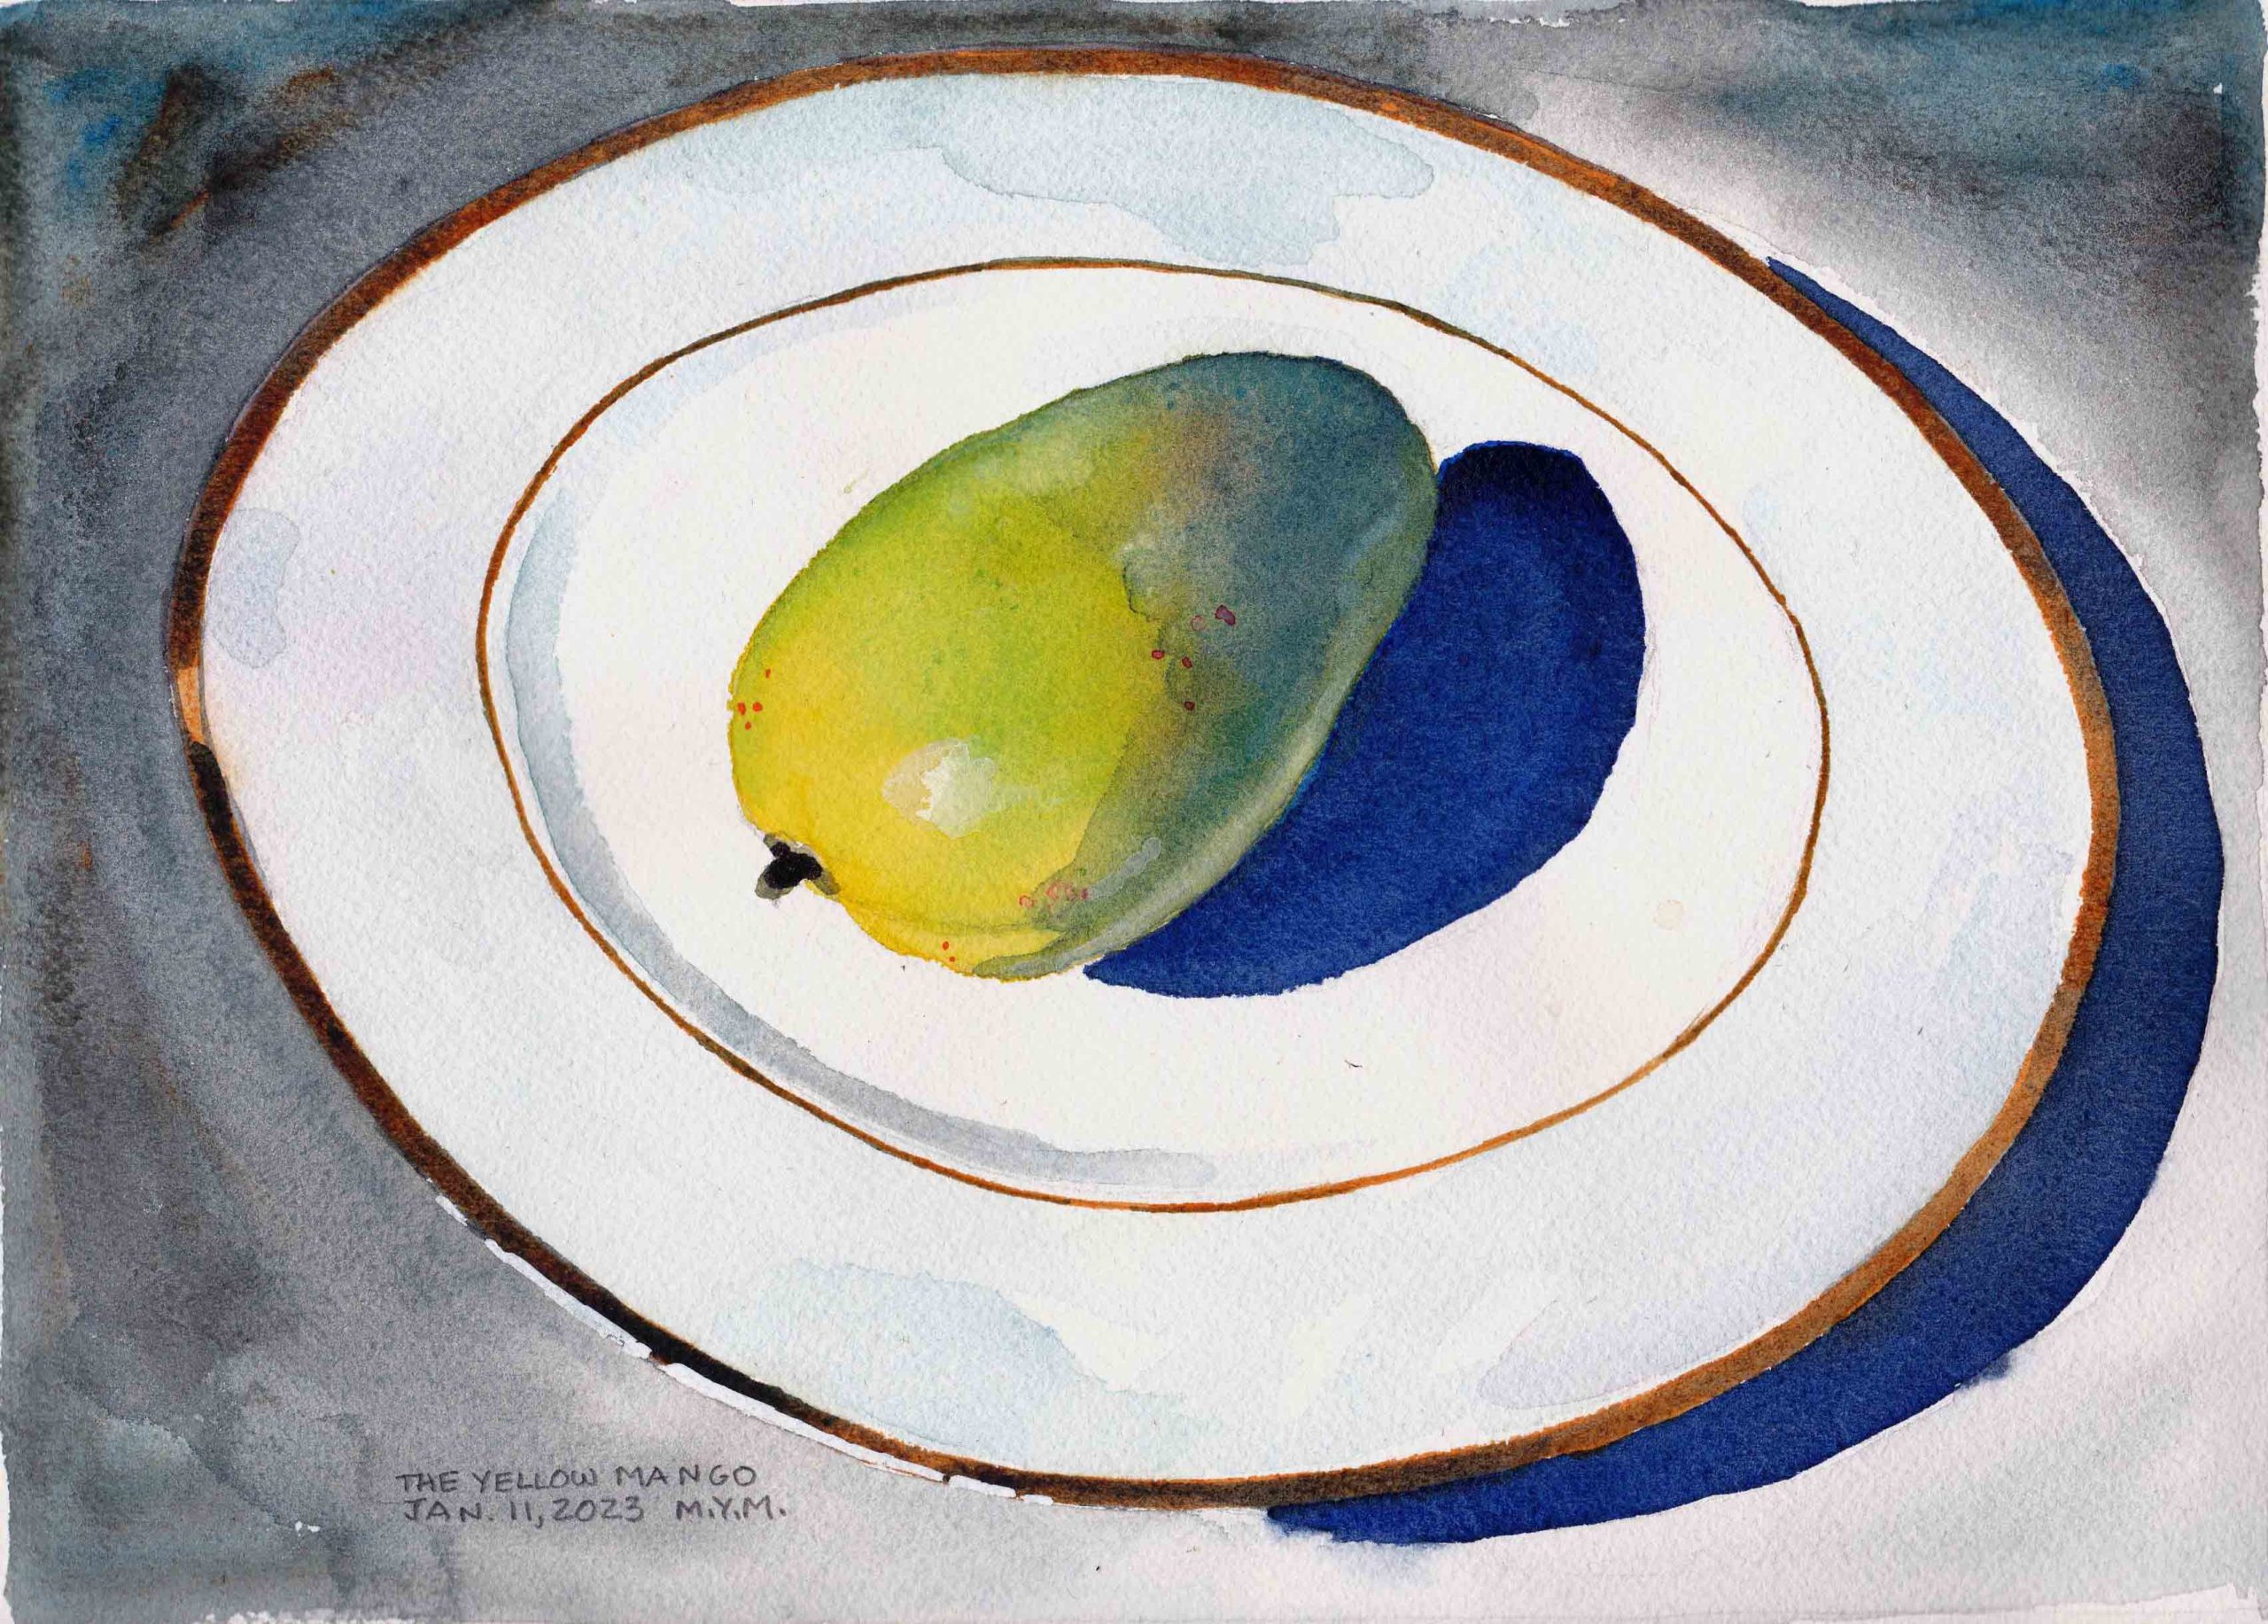 A small watercolour painting of a yellow mango sitting on a white gold-rimmed limoges dinner plate.